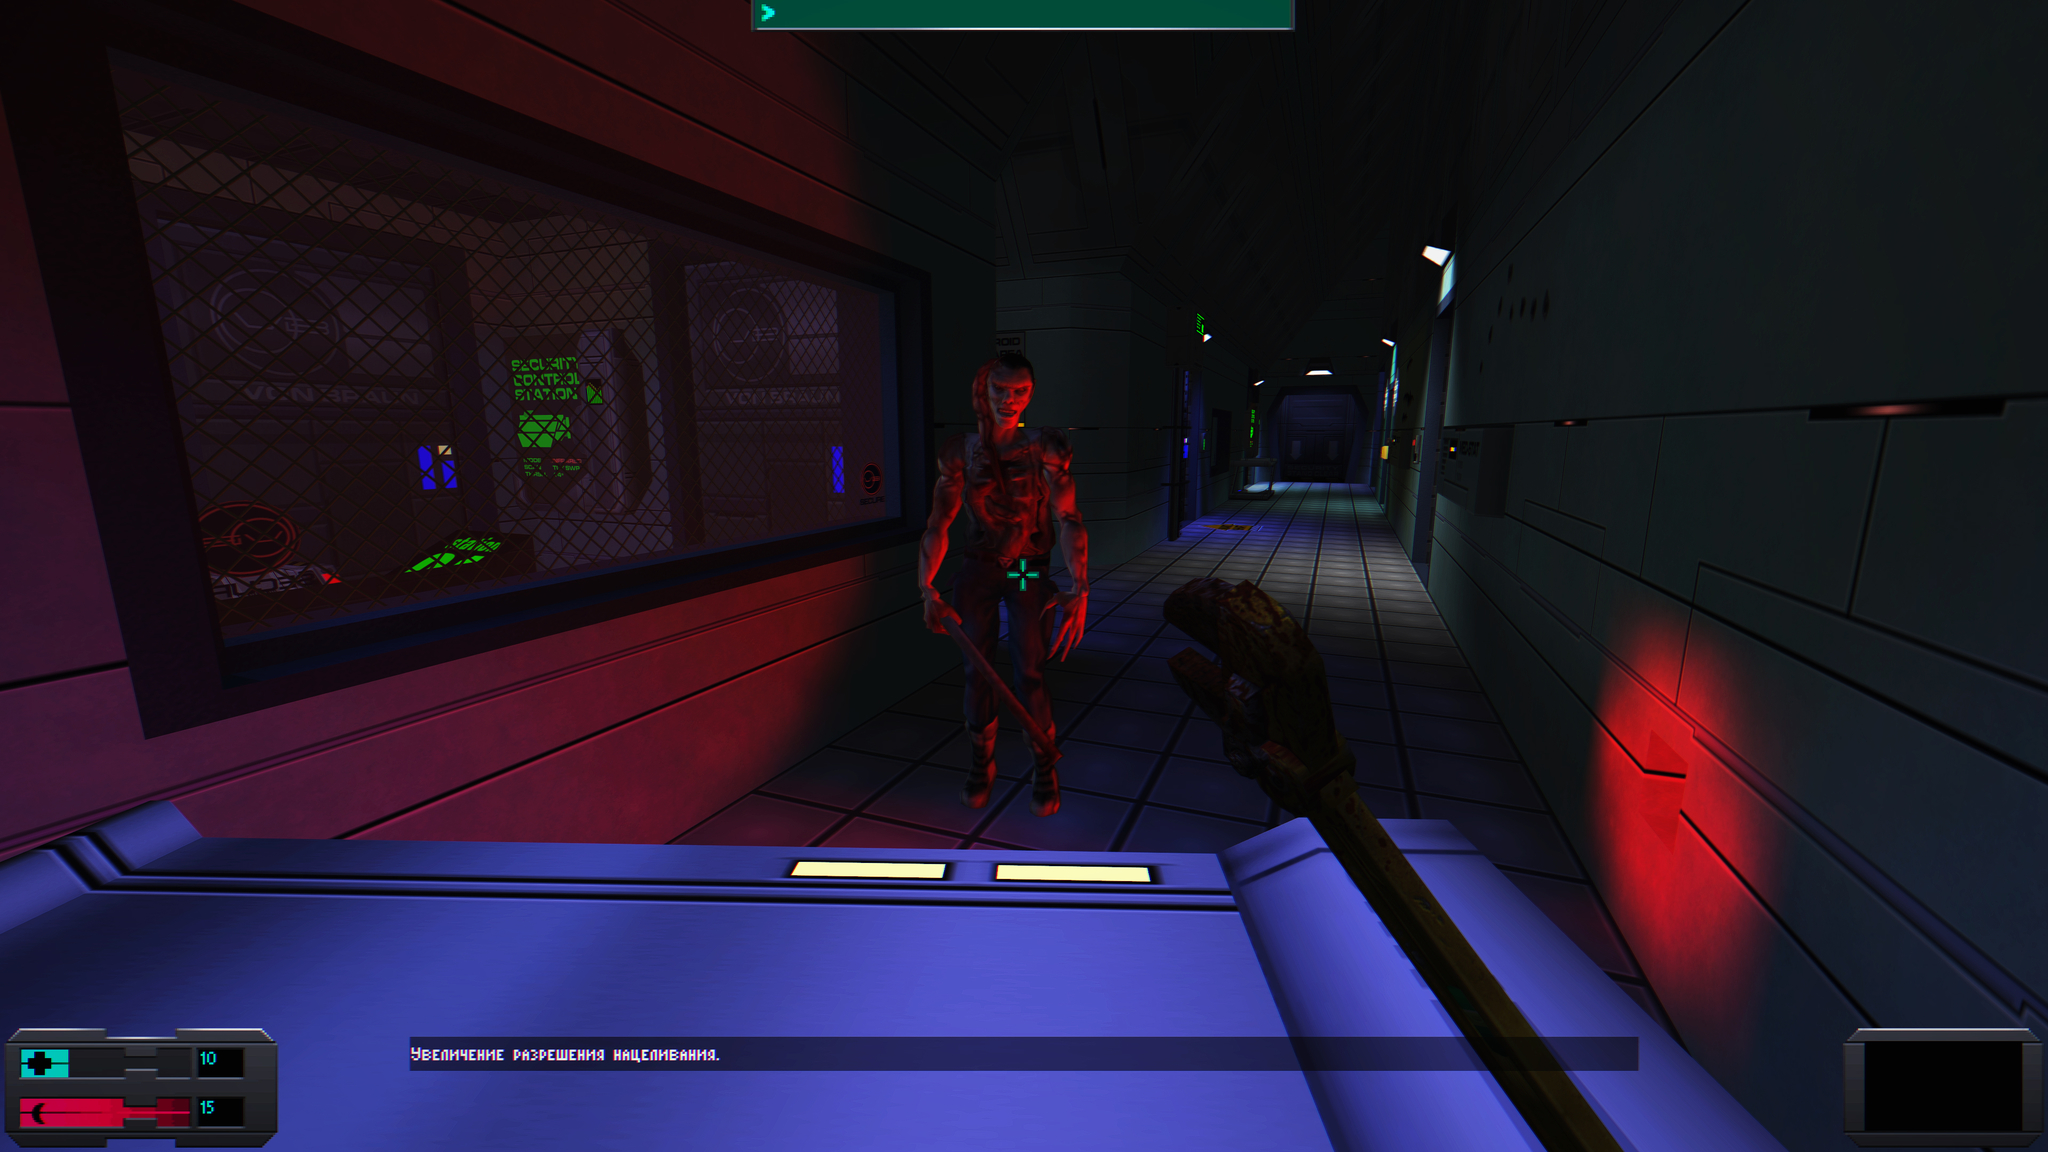 who voices the infamous citadel station a.i known as s.h.o.d.a.n, in the system shock games?